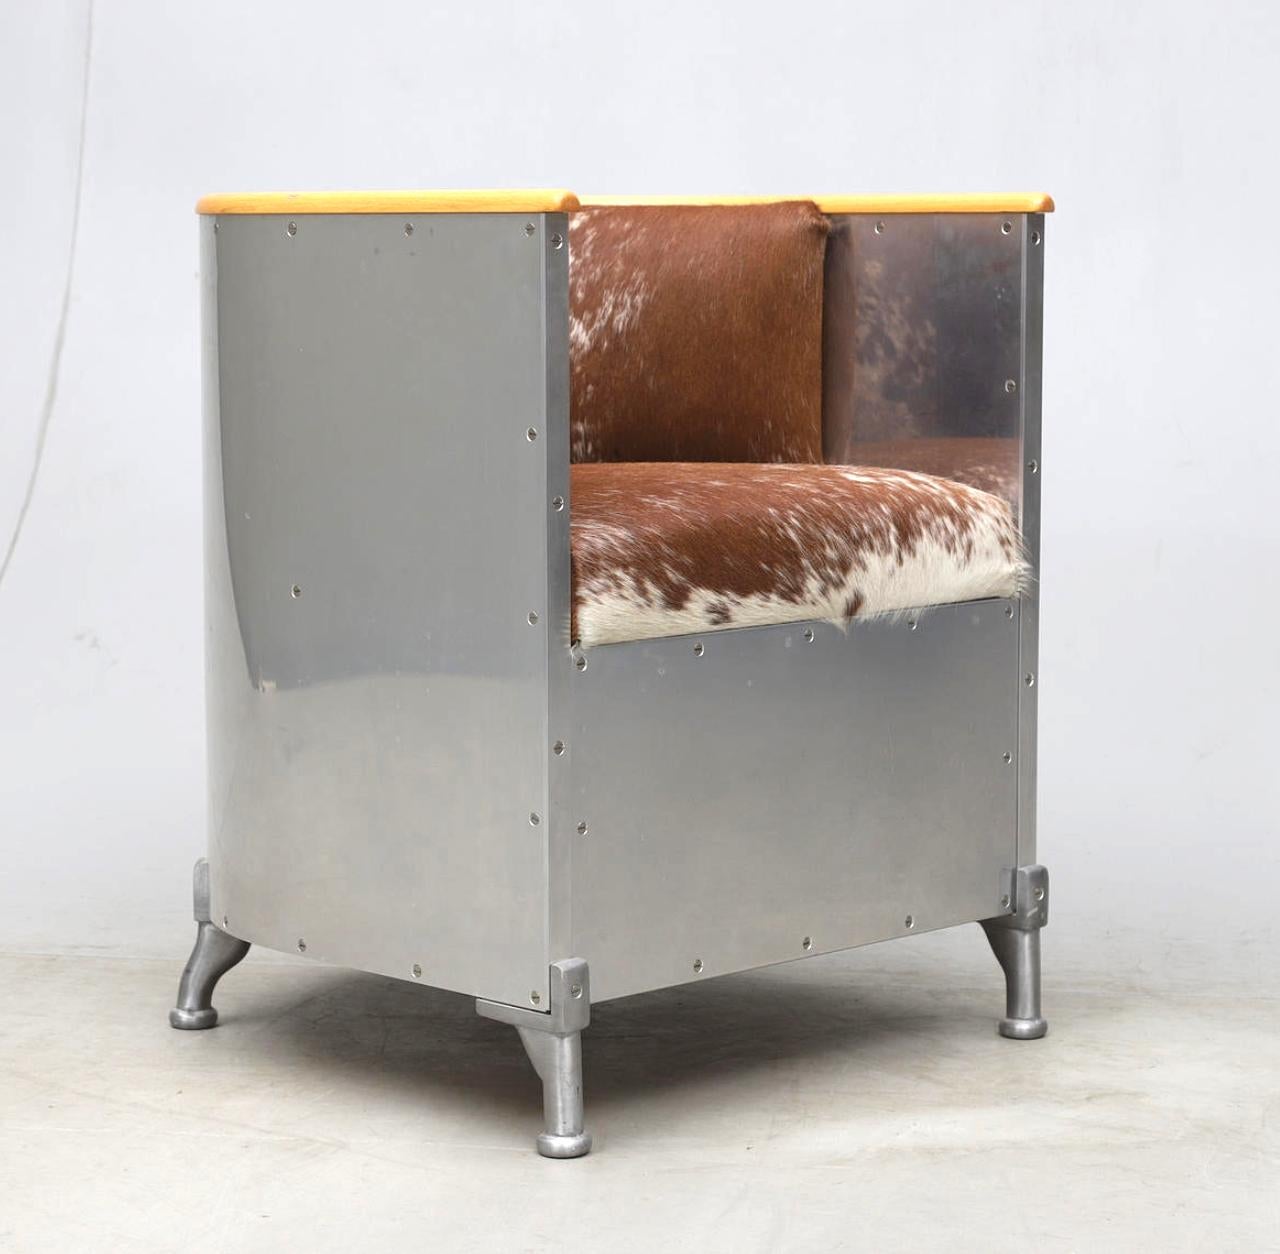 The armchair designed by MATS THESELIUS. Model  “Aluminium chair”, produced by Källemo, numbered 2/33.

Frame in aluminum. Cast aluminum legs. Frame in book. Firmly upholstered back and seat, covered with cowhide. Seat height approx. 18″. Total